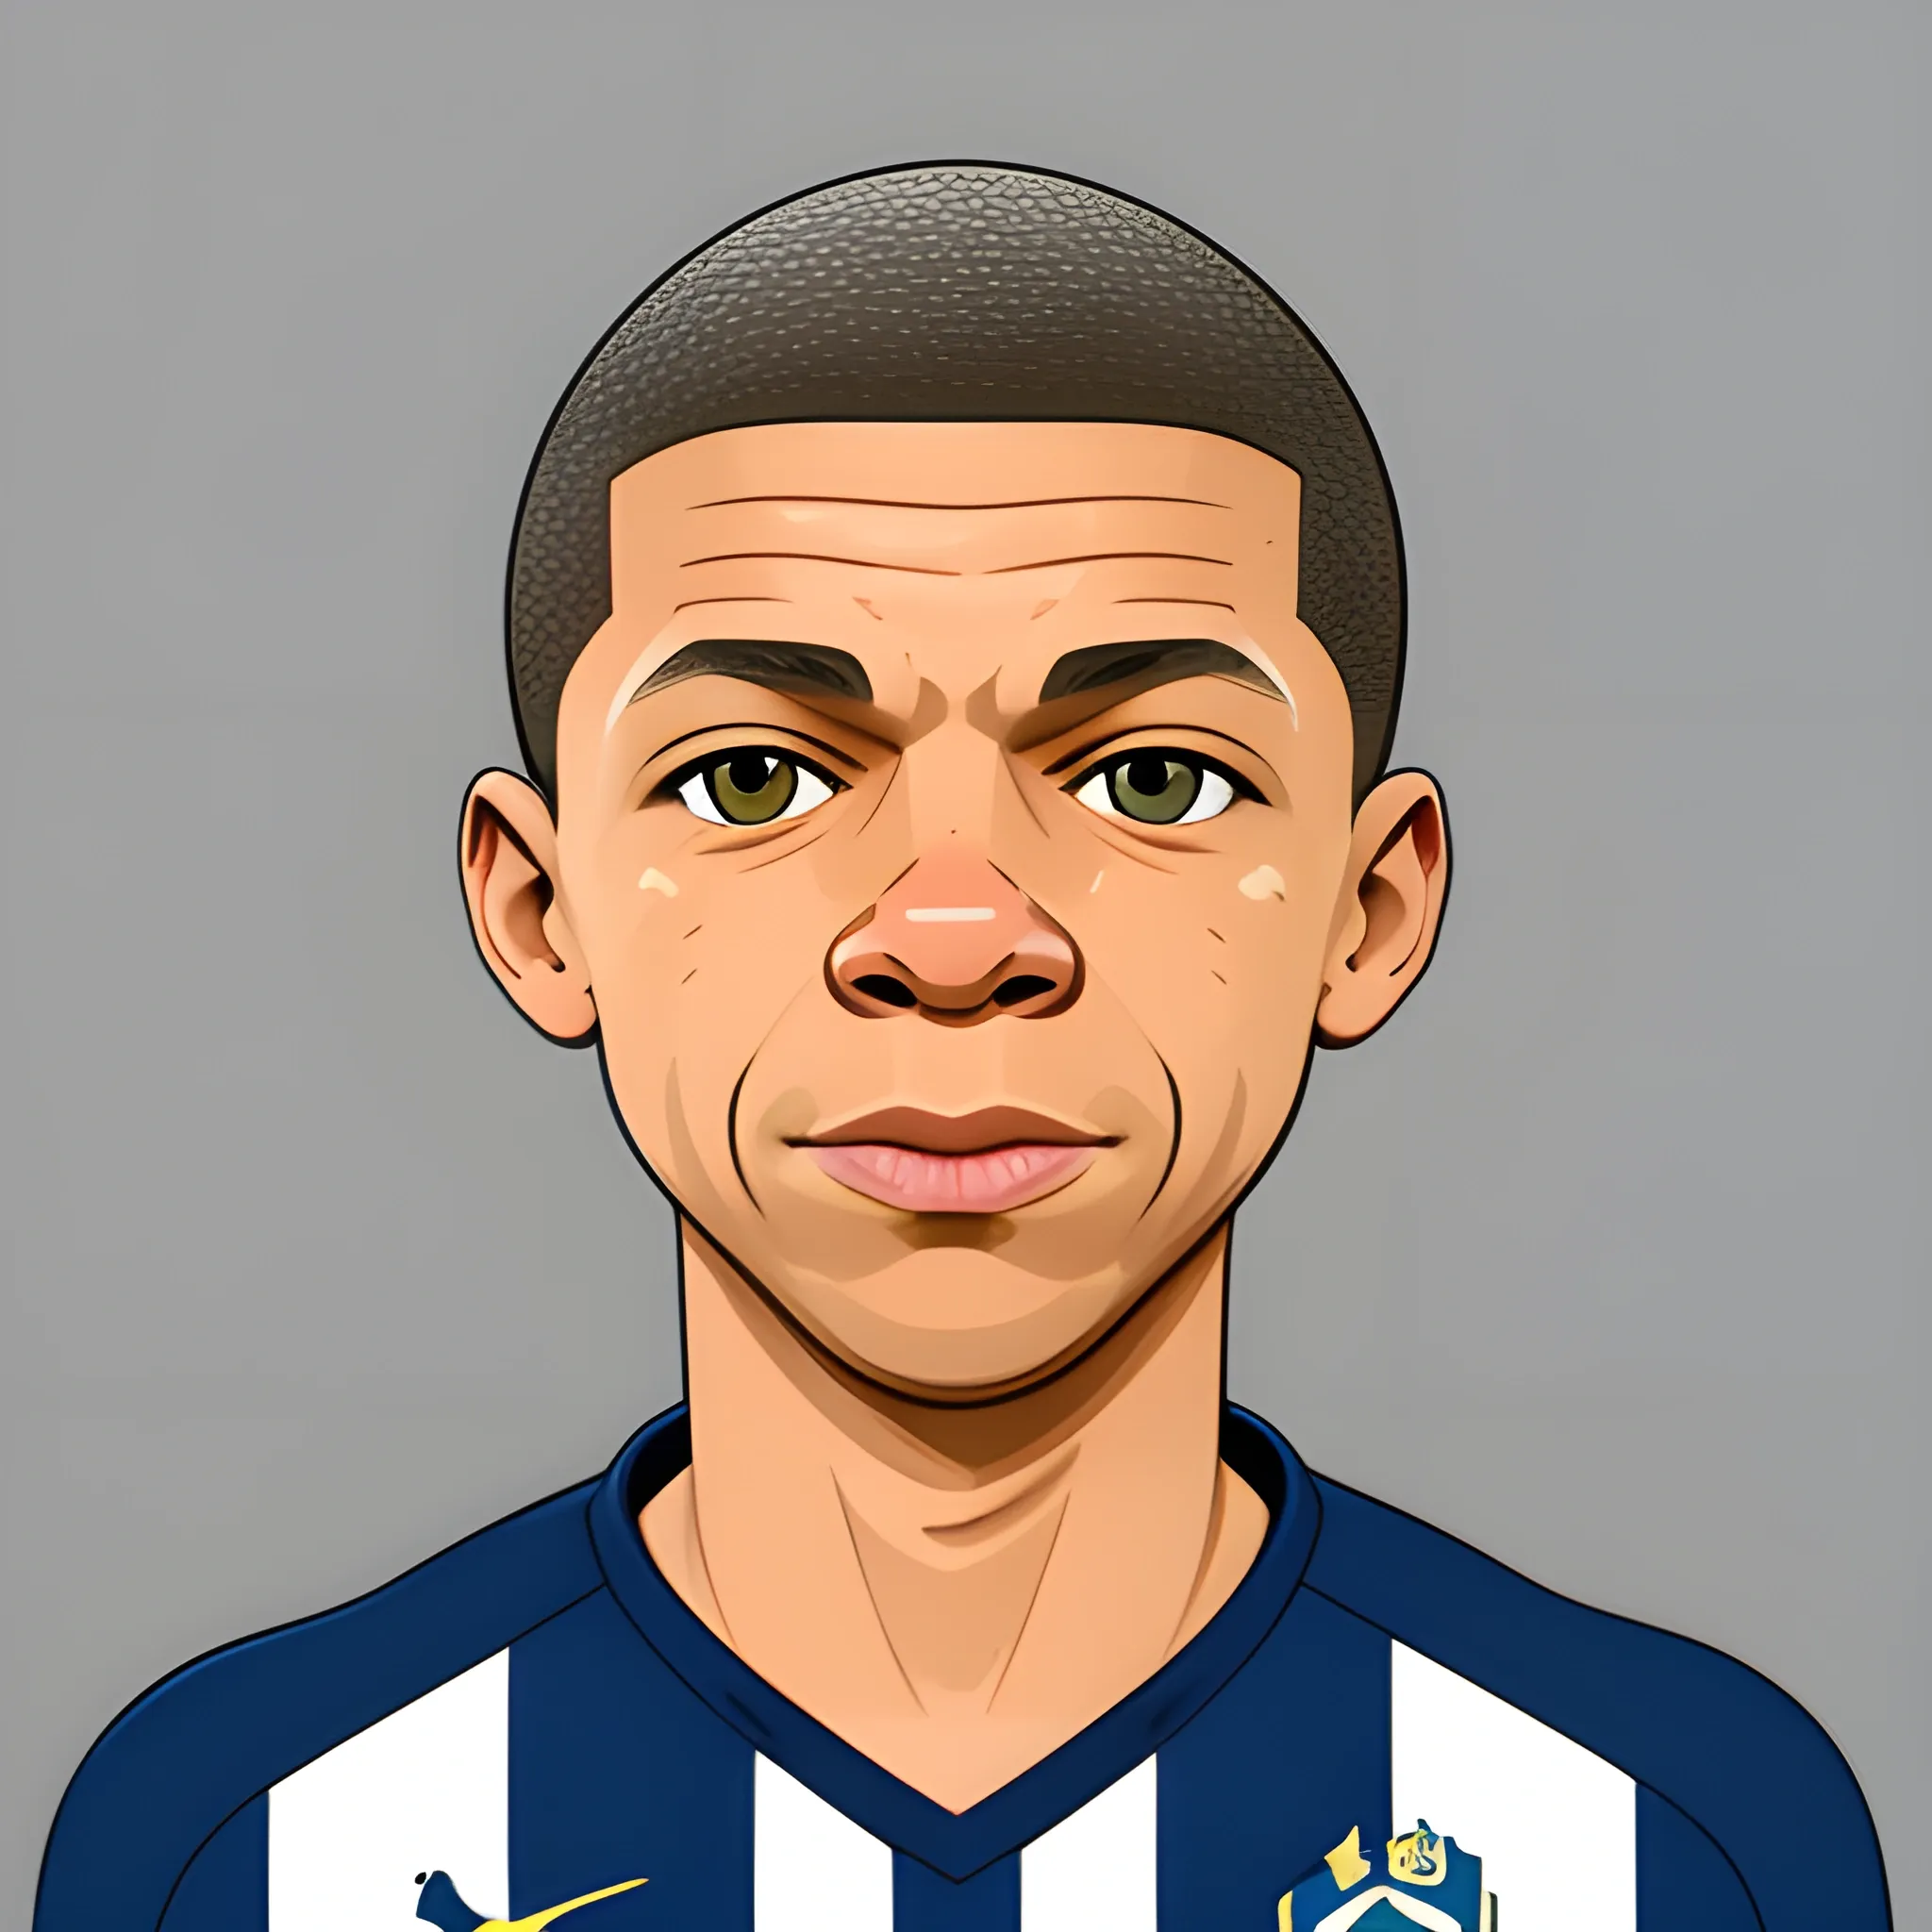 Character, soccer ballon, Mbappe face. Toon style